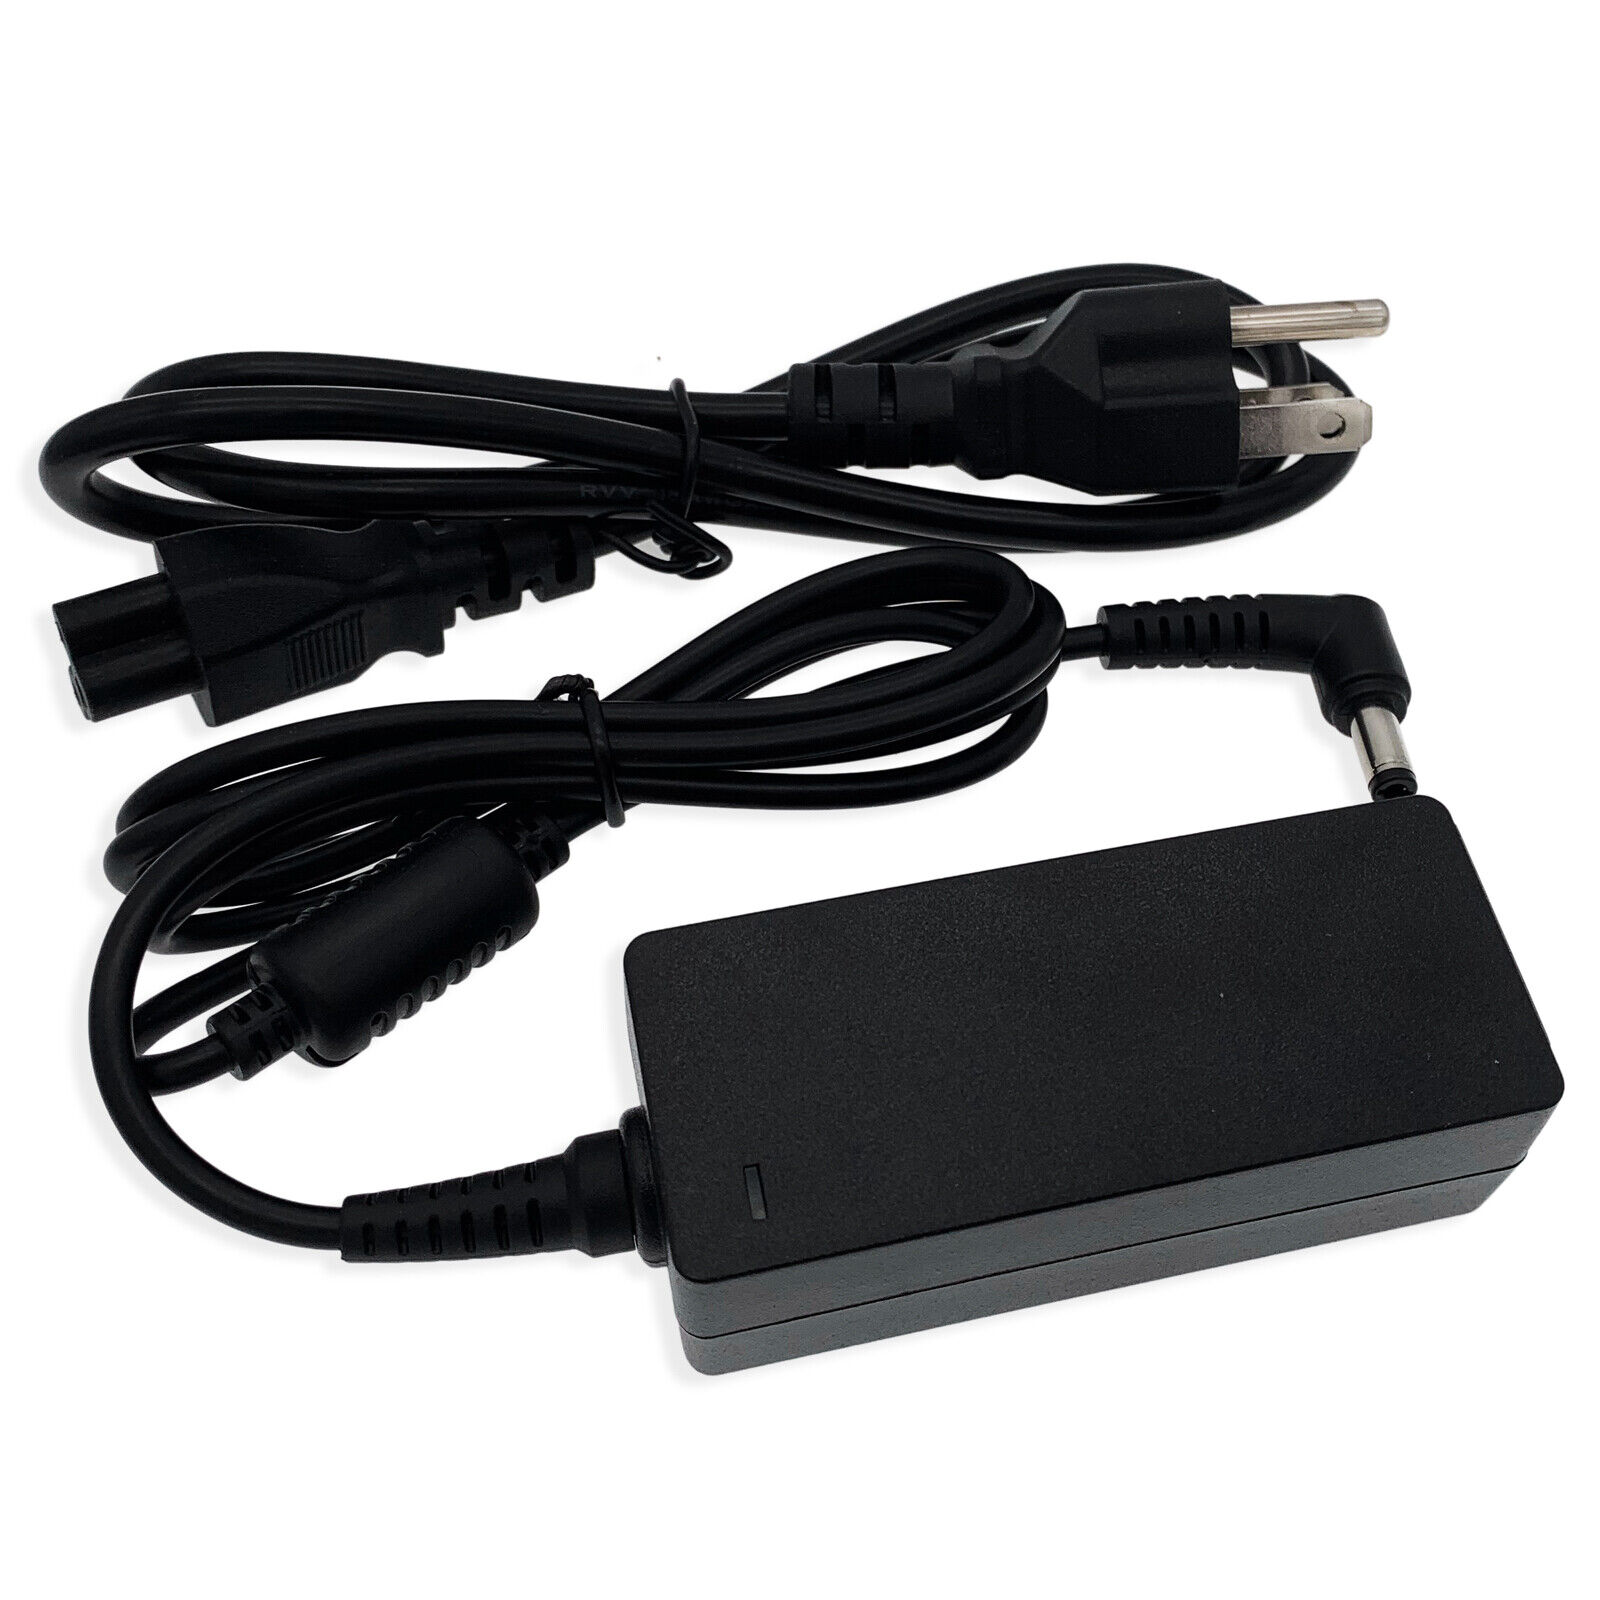 AC Adapter Charger for Gateway Tablet PC TA2 TA3 TA4 TA5 TA7 Laptop Power Cord Brand Unbranded/Generic Compatible Brand